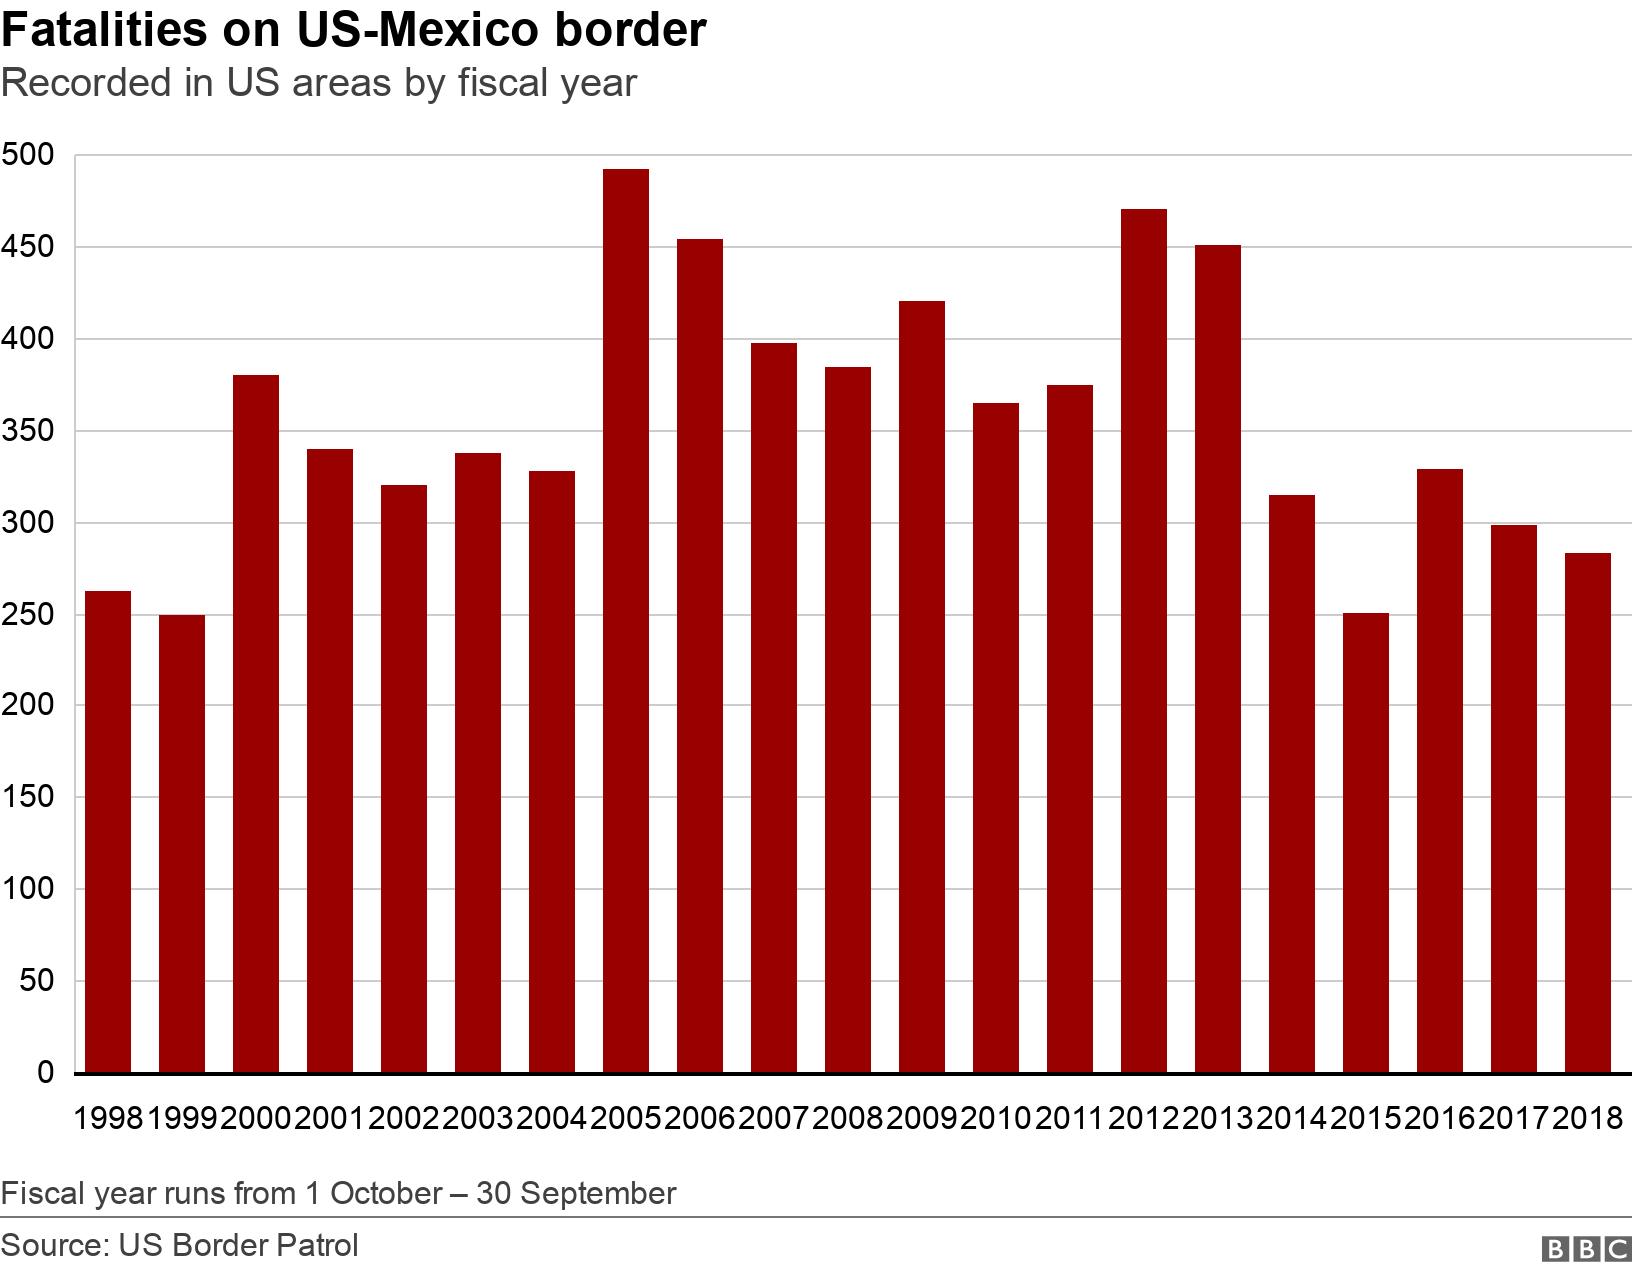 Fatalities on US-Mexico border. Recorded in US areas by fiscal year. This bar chart shows deaths on the US border from 19998 to 2018. The broad shape goes from approx 250 in 1998 to close to just slgihtly higher in 2018, but with a surge in the middle and erratic peaks Fiscal year runs from 1 October – 30 September.